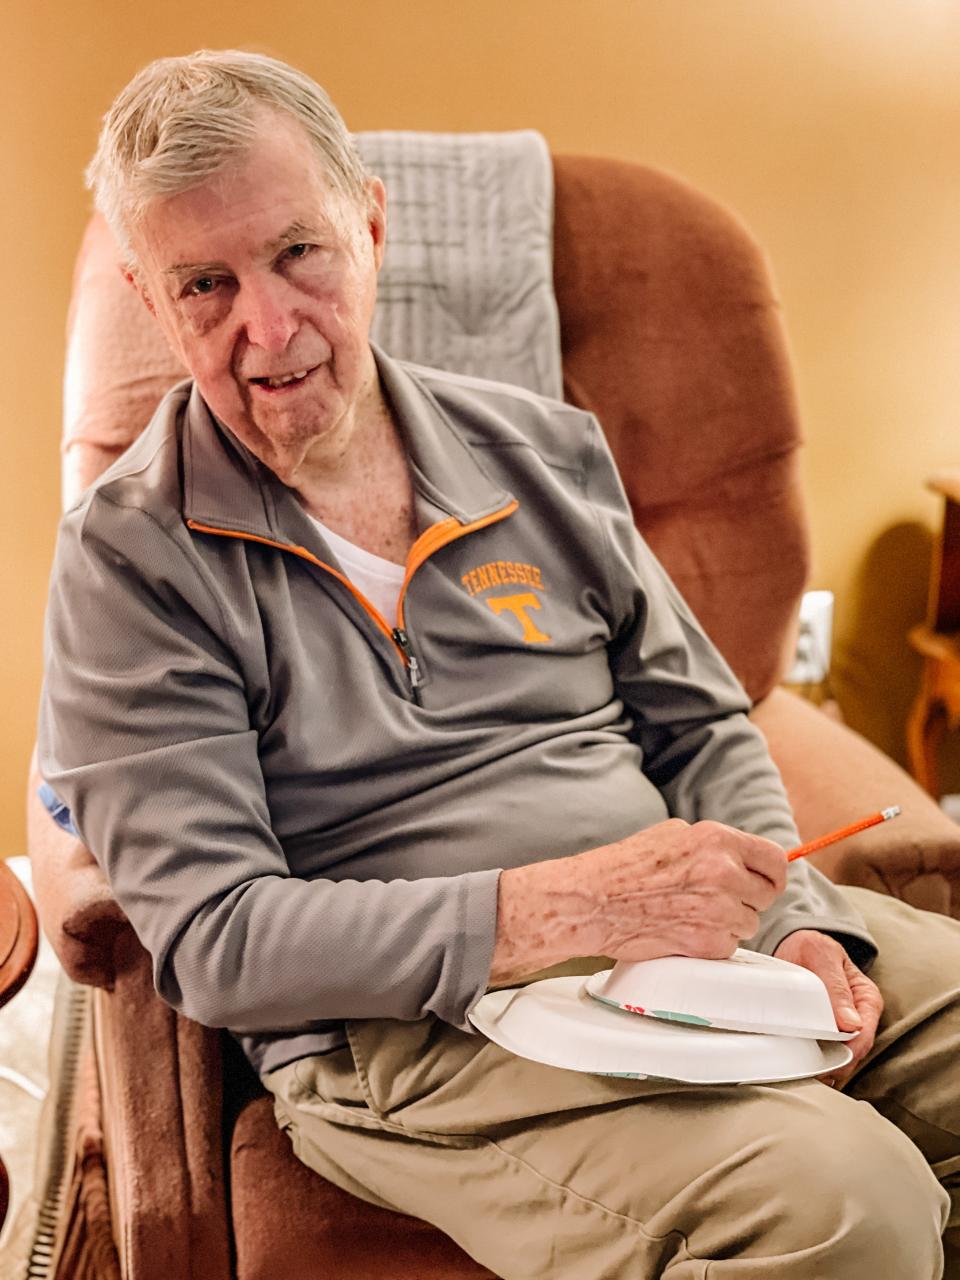 92-year-old Gene Money, who suffers from Parkinson’s disease, always has a ready supply of paper plates stored in his walker to draw portraits. Halls, Jan. 31, 2022.